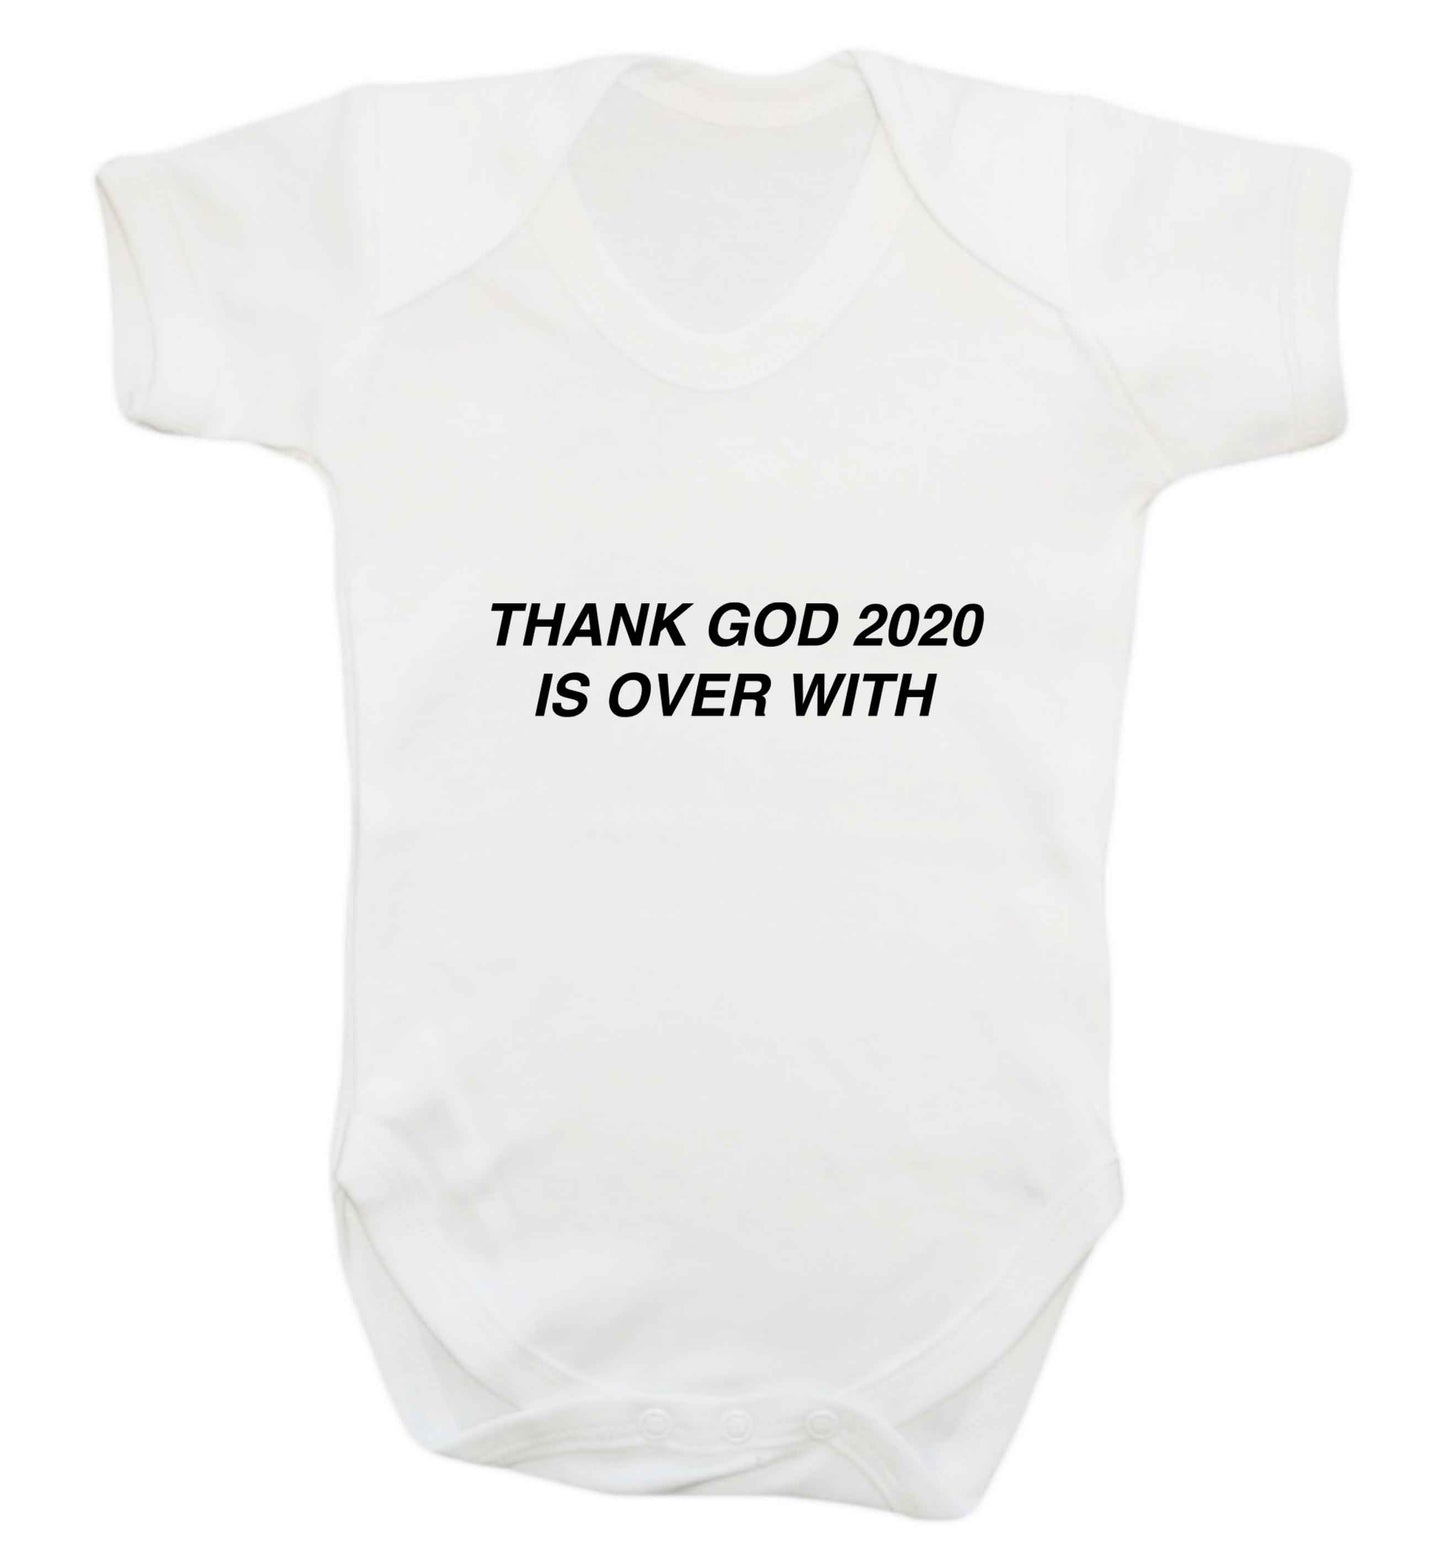 Thank god 2020 is over with baby vest white 18-24 months